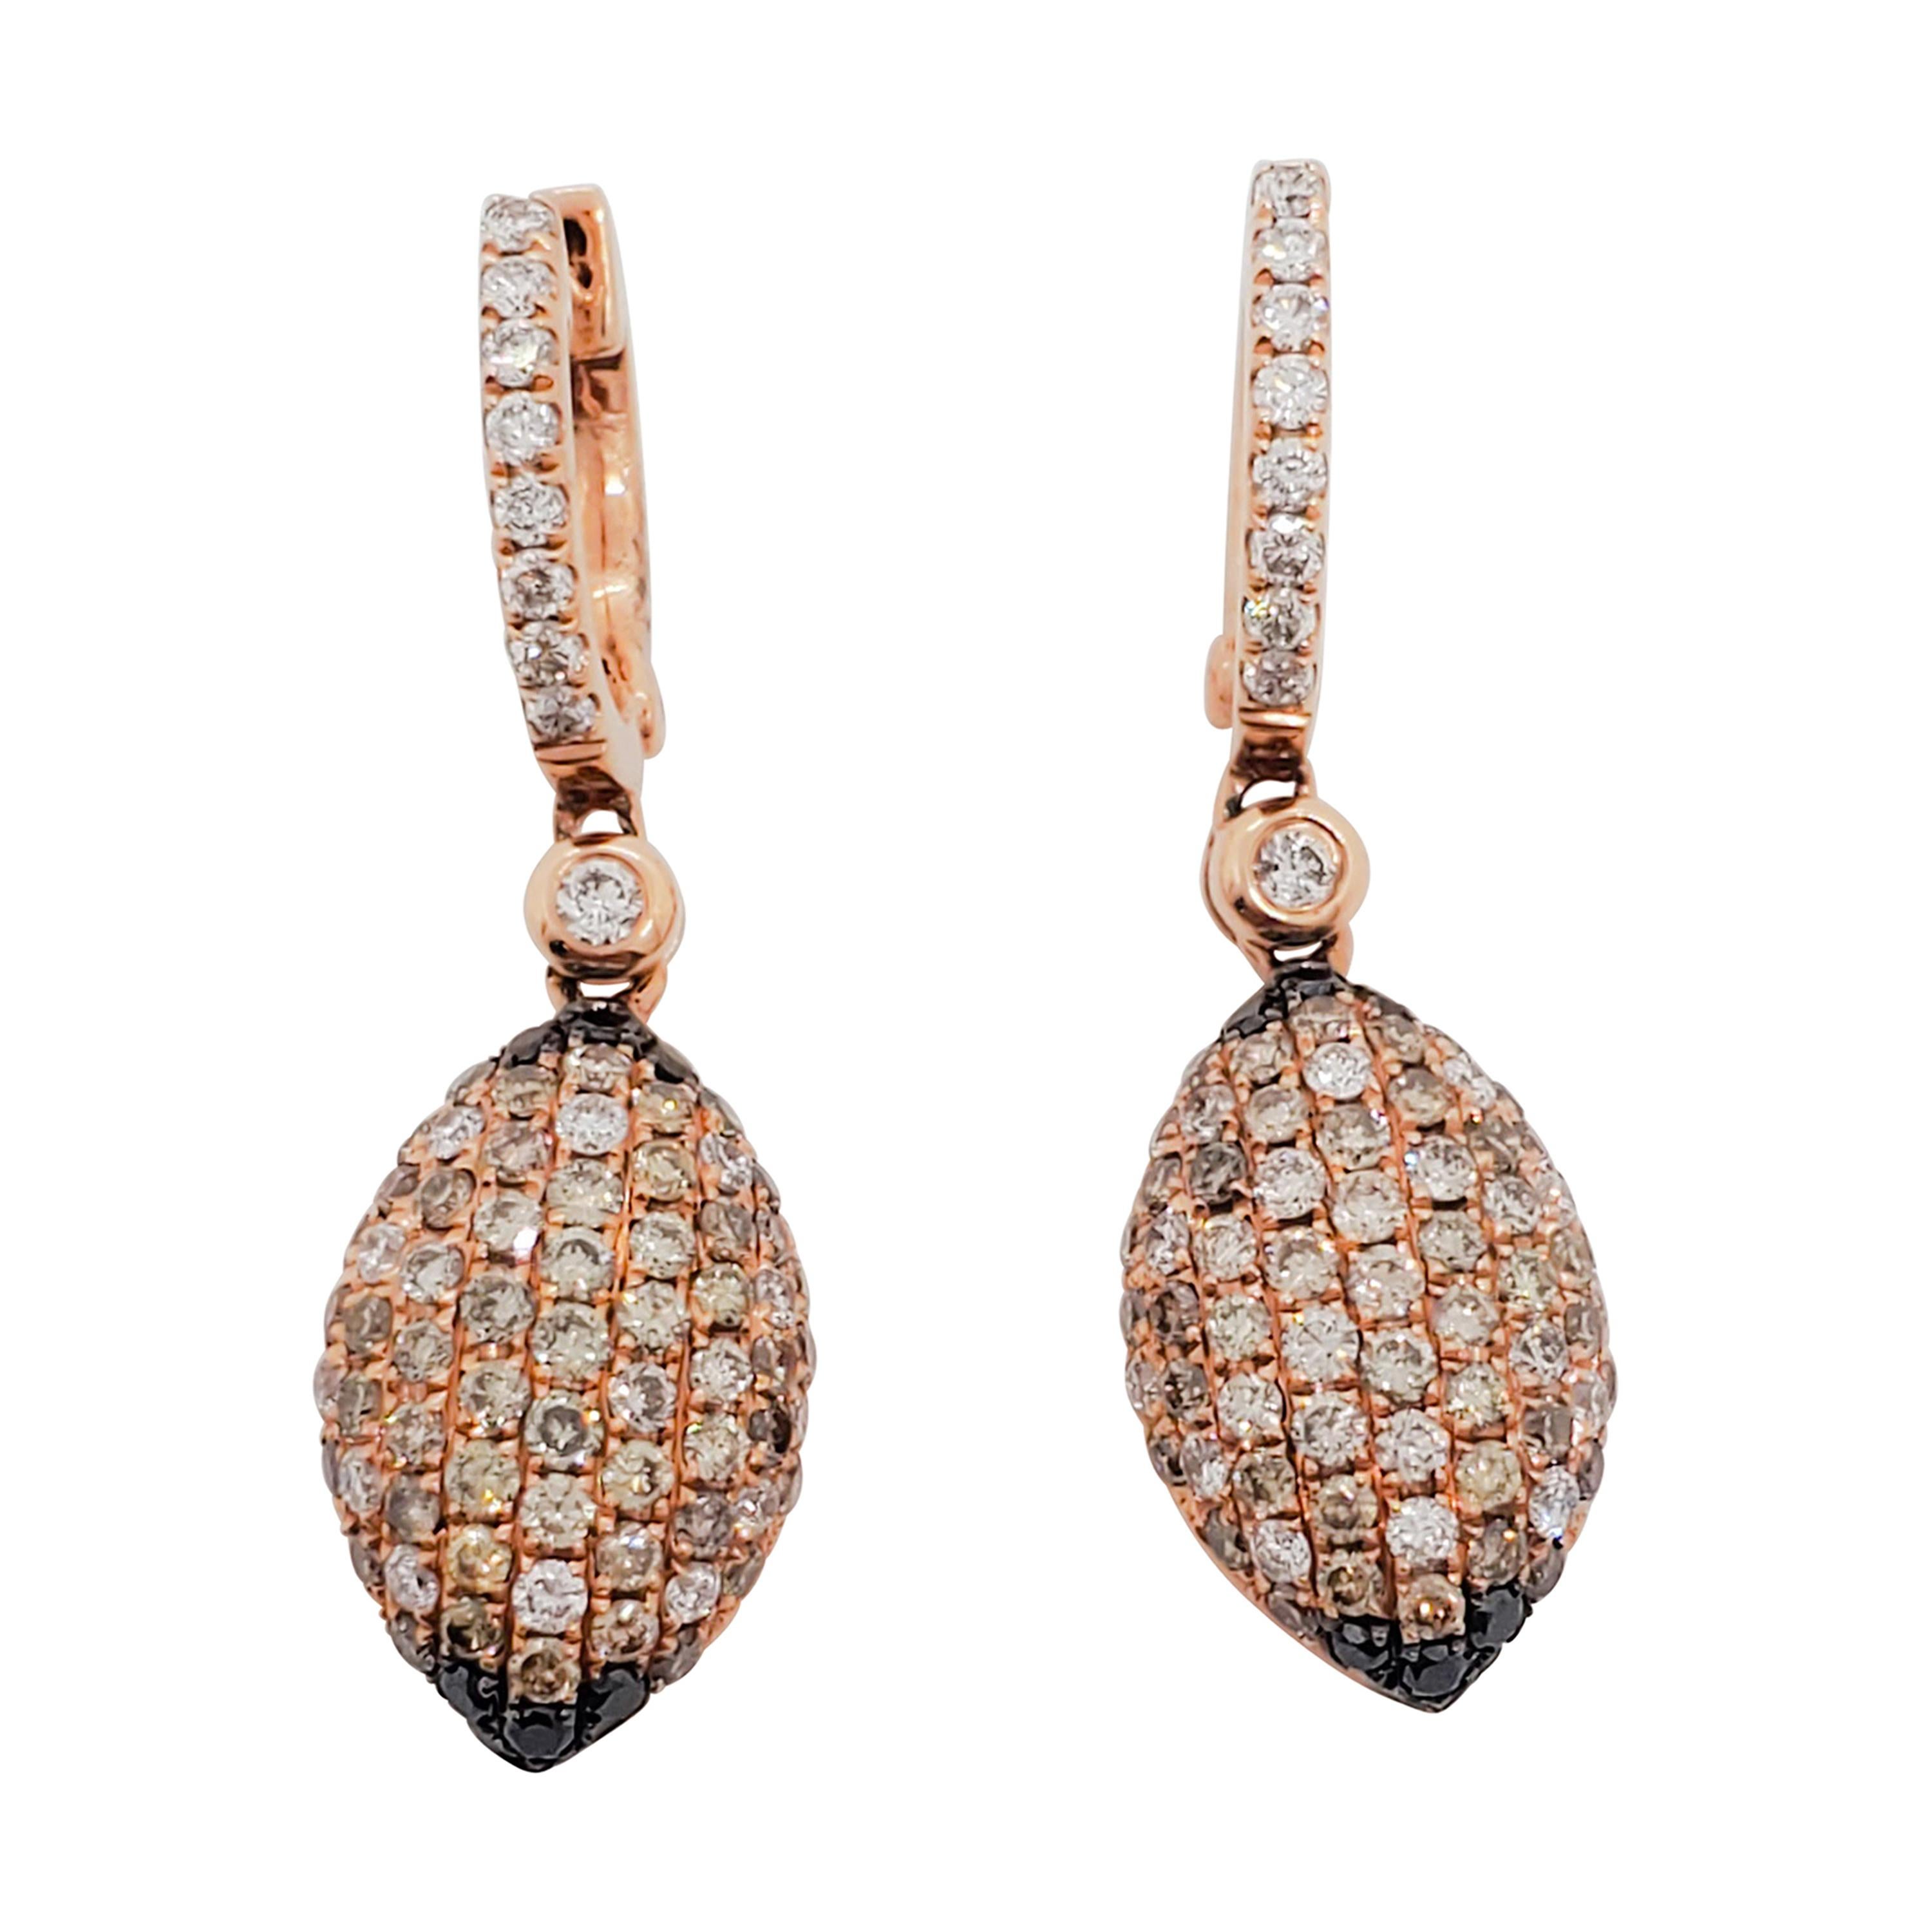  White and Black Diamond Pave Dangle Earrings in 14k Rose Gold For Sale